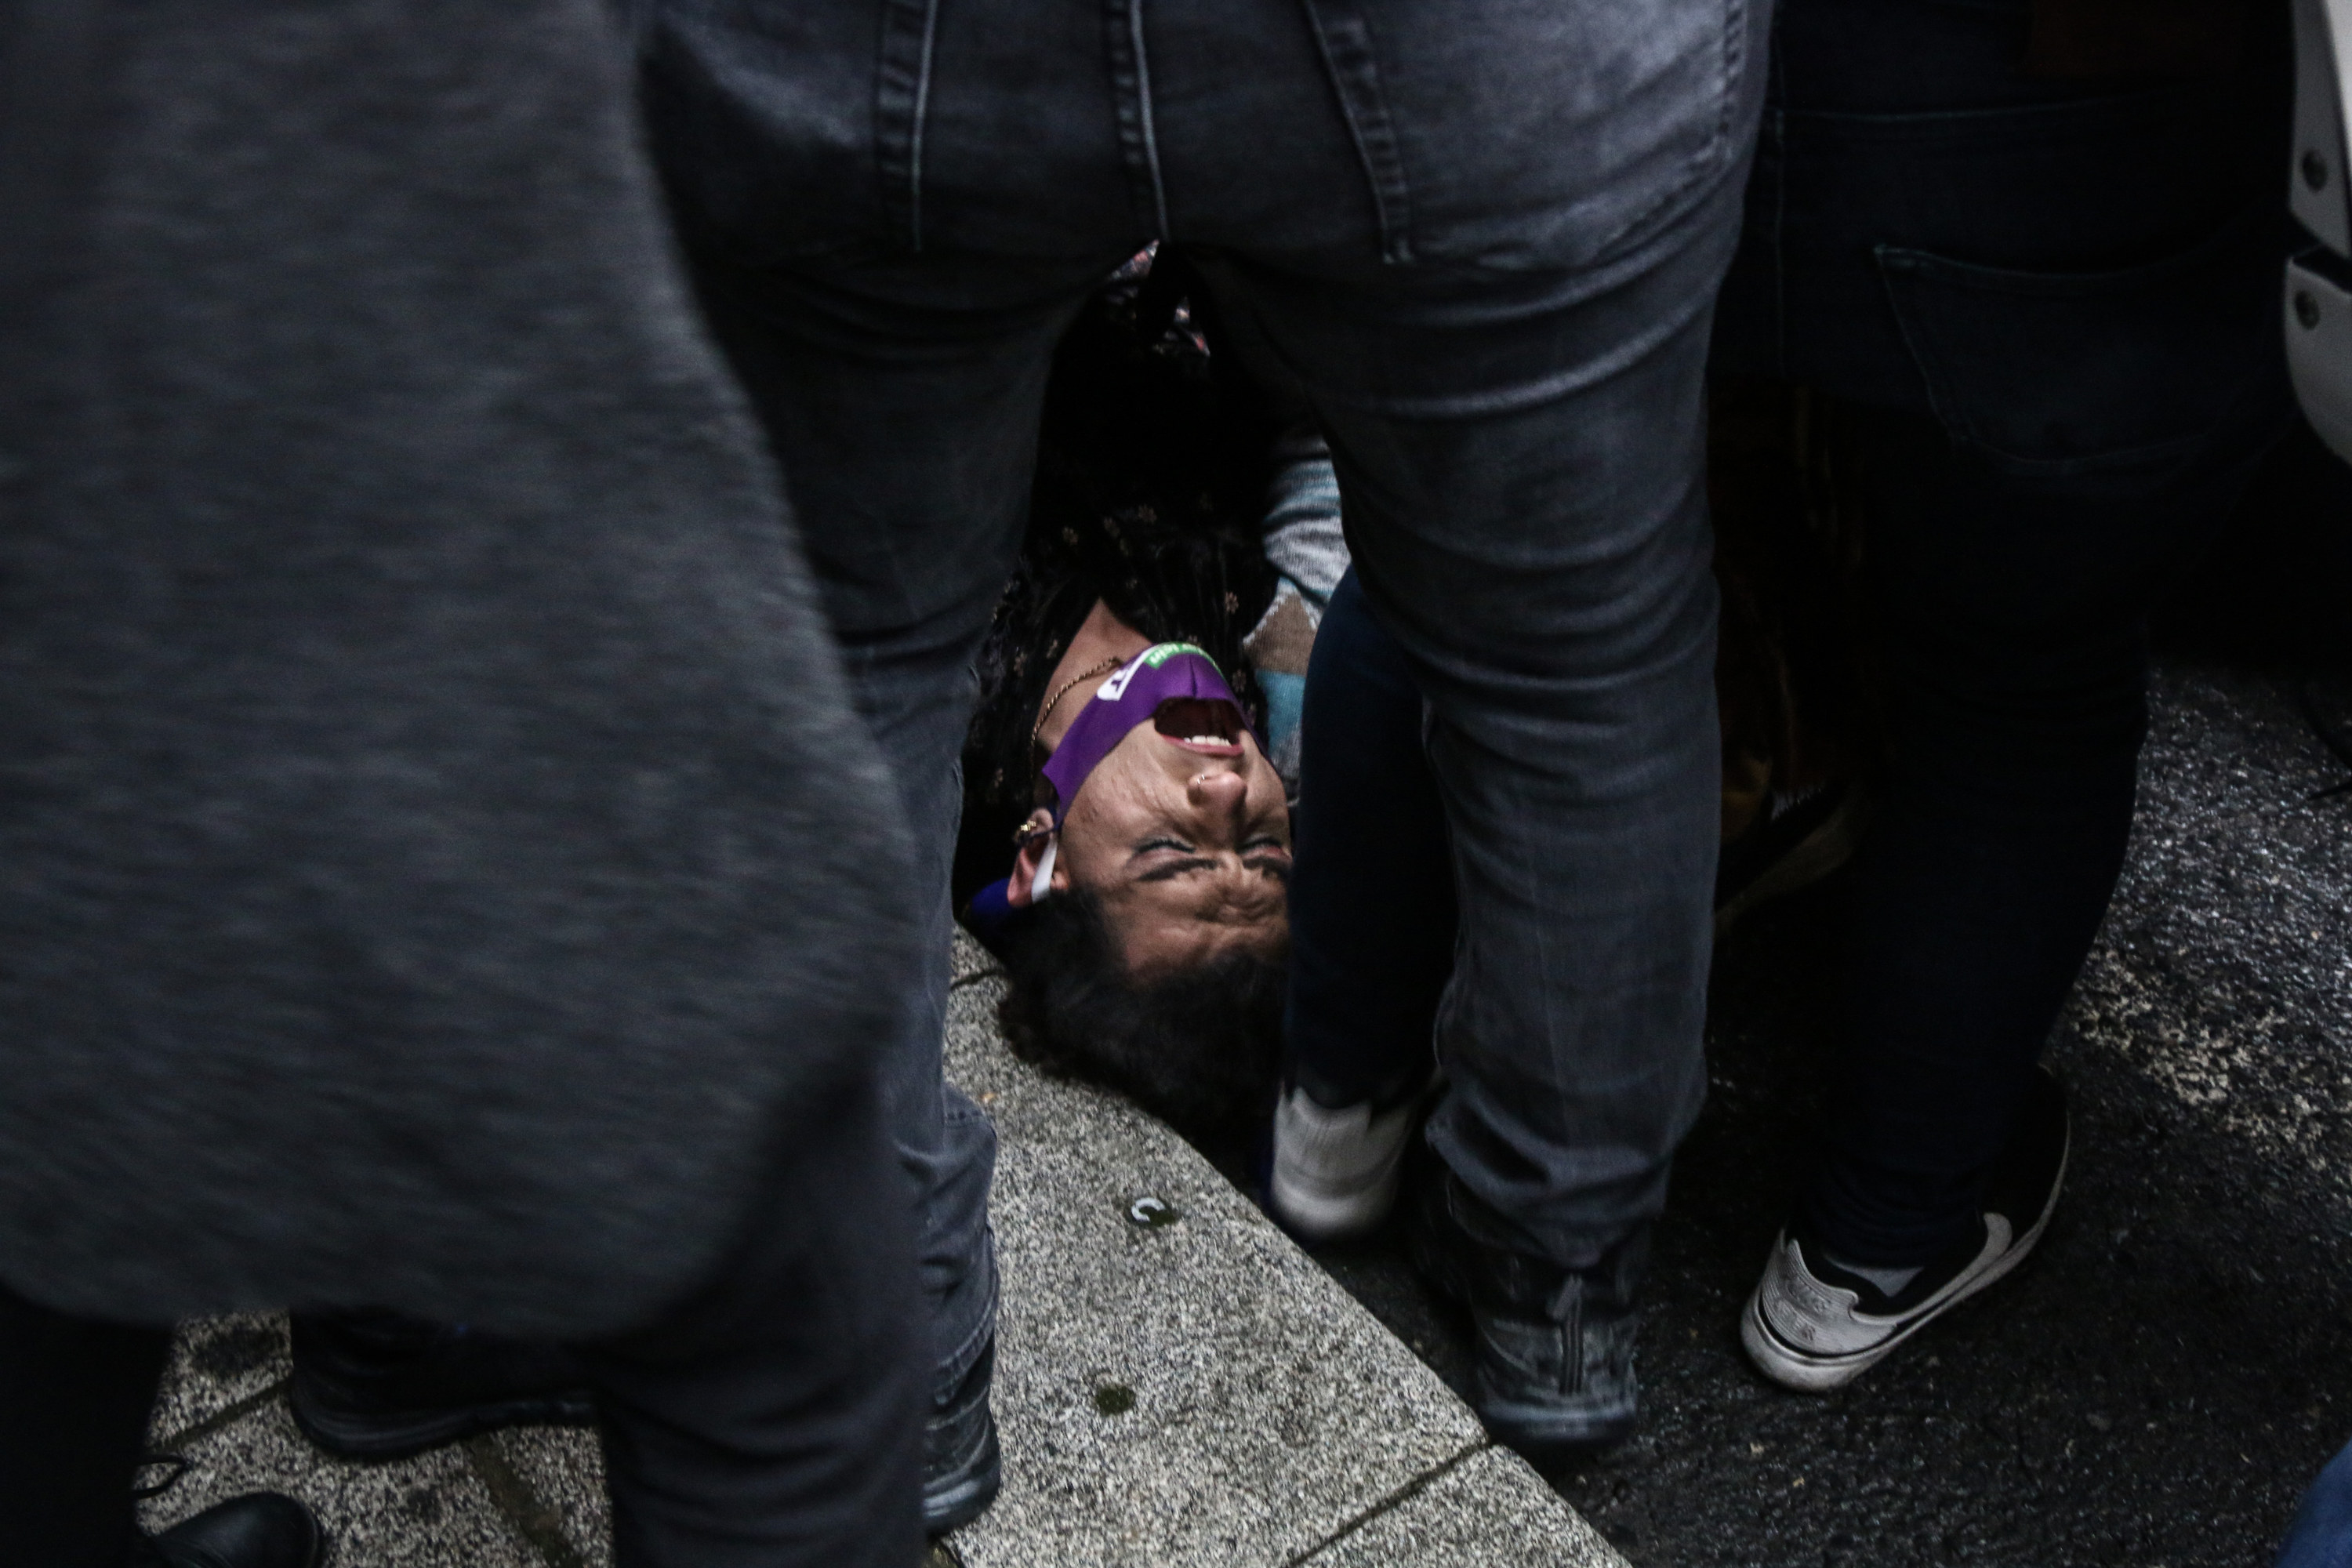 An activist shouts while lying on the ground, surrounded by other people standing